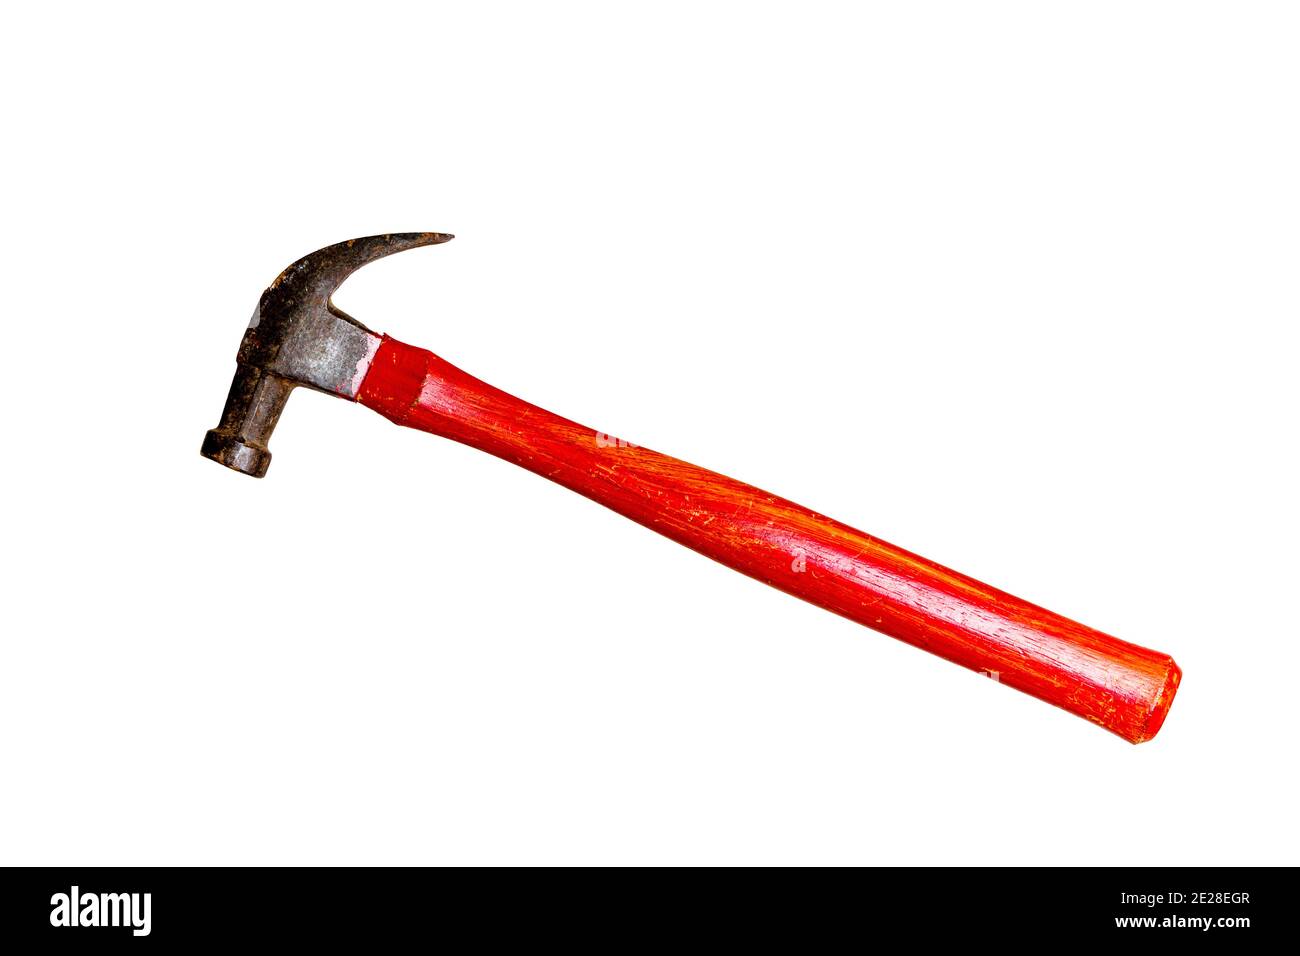 Antique claw hammer on a white background Stock Photo